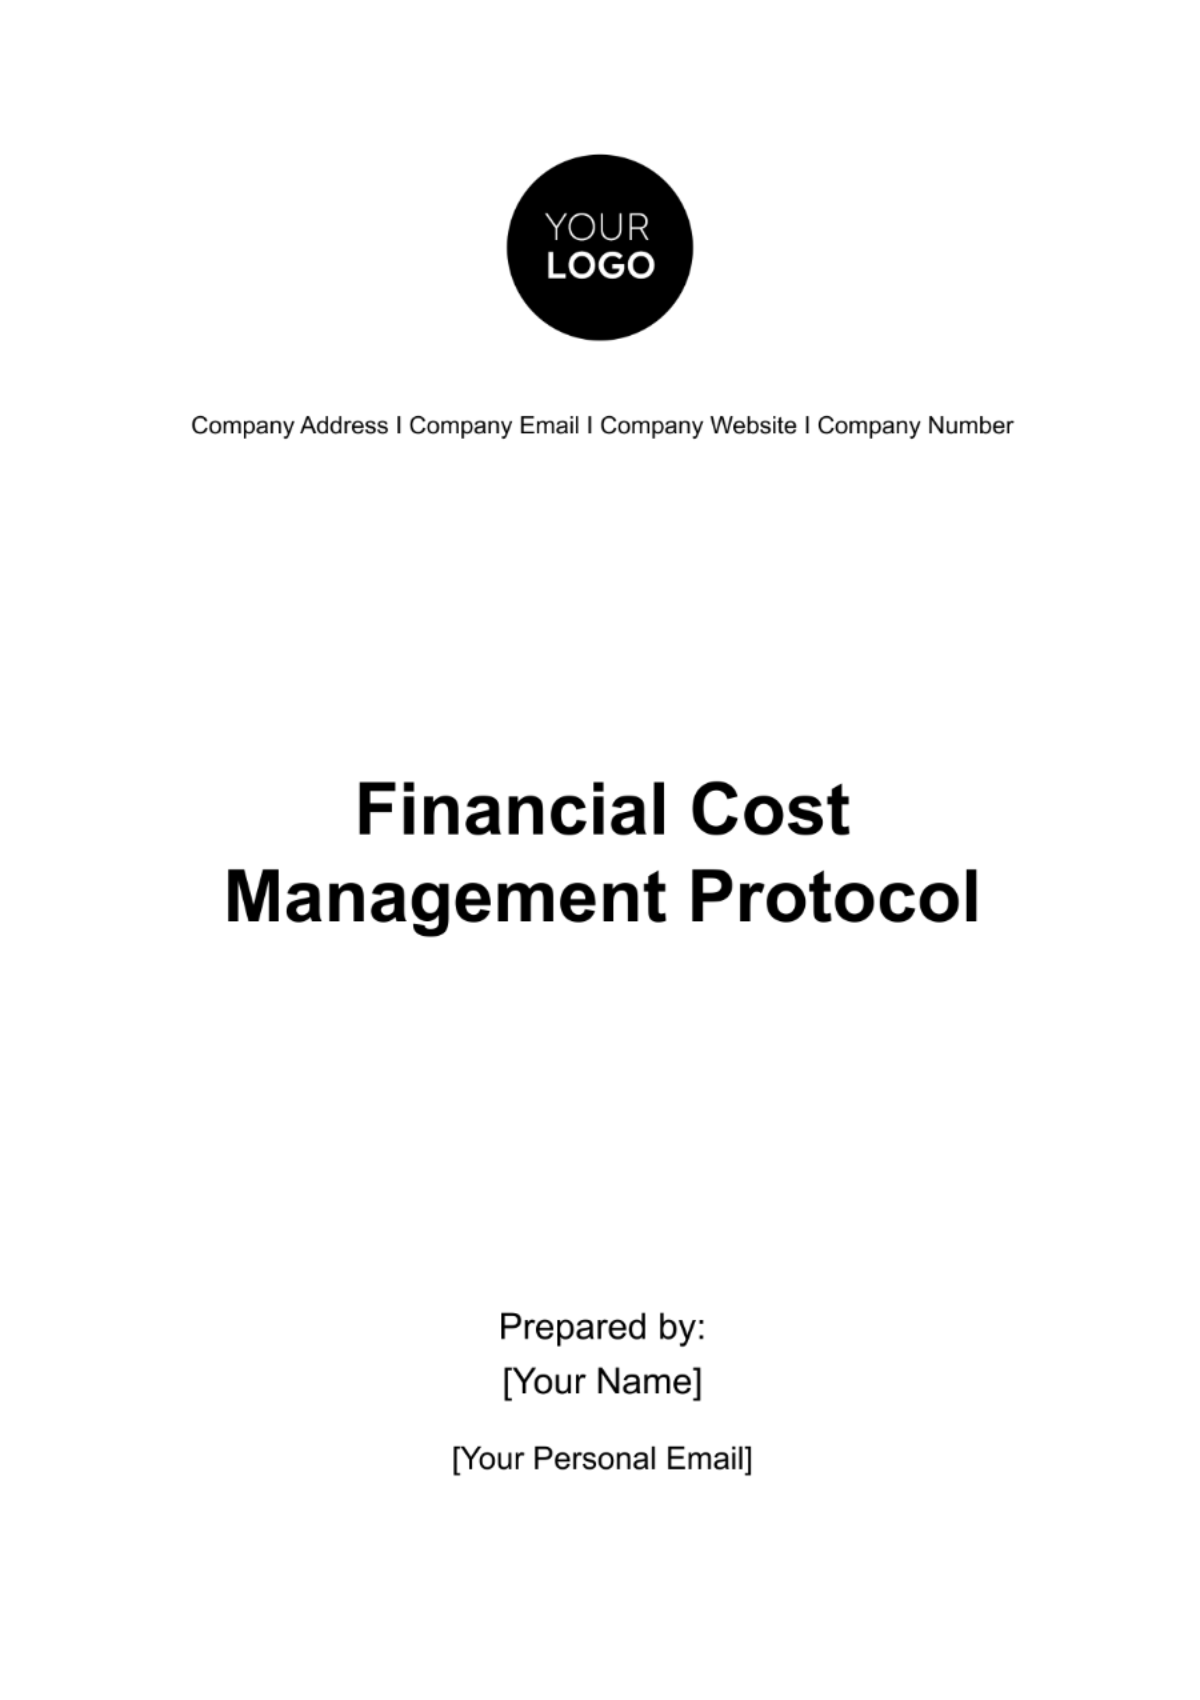 Financial Cost Management Protocol Template